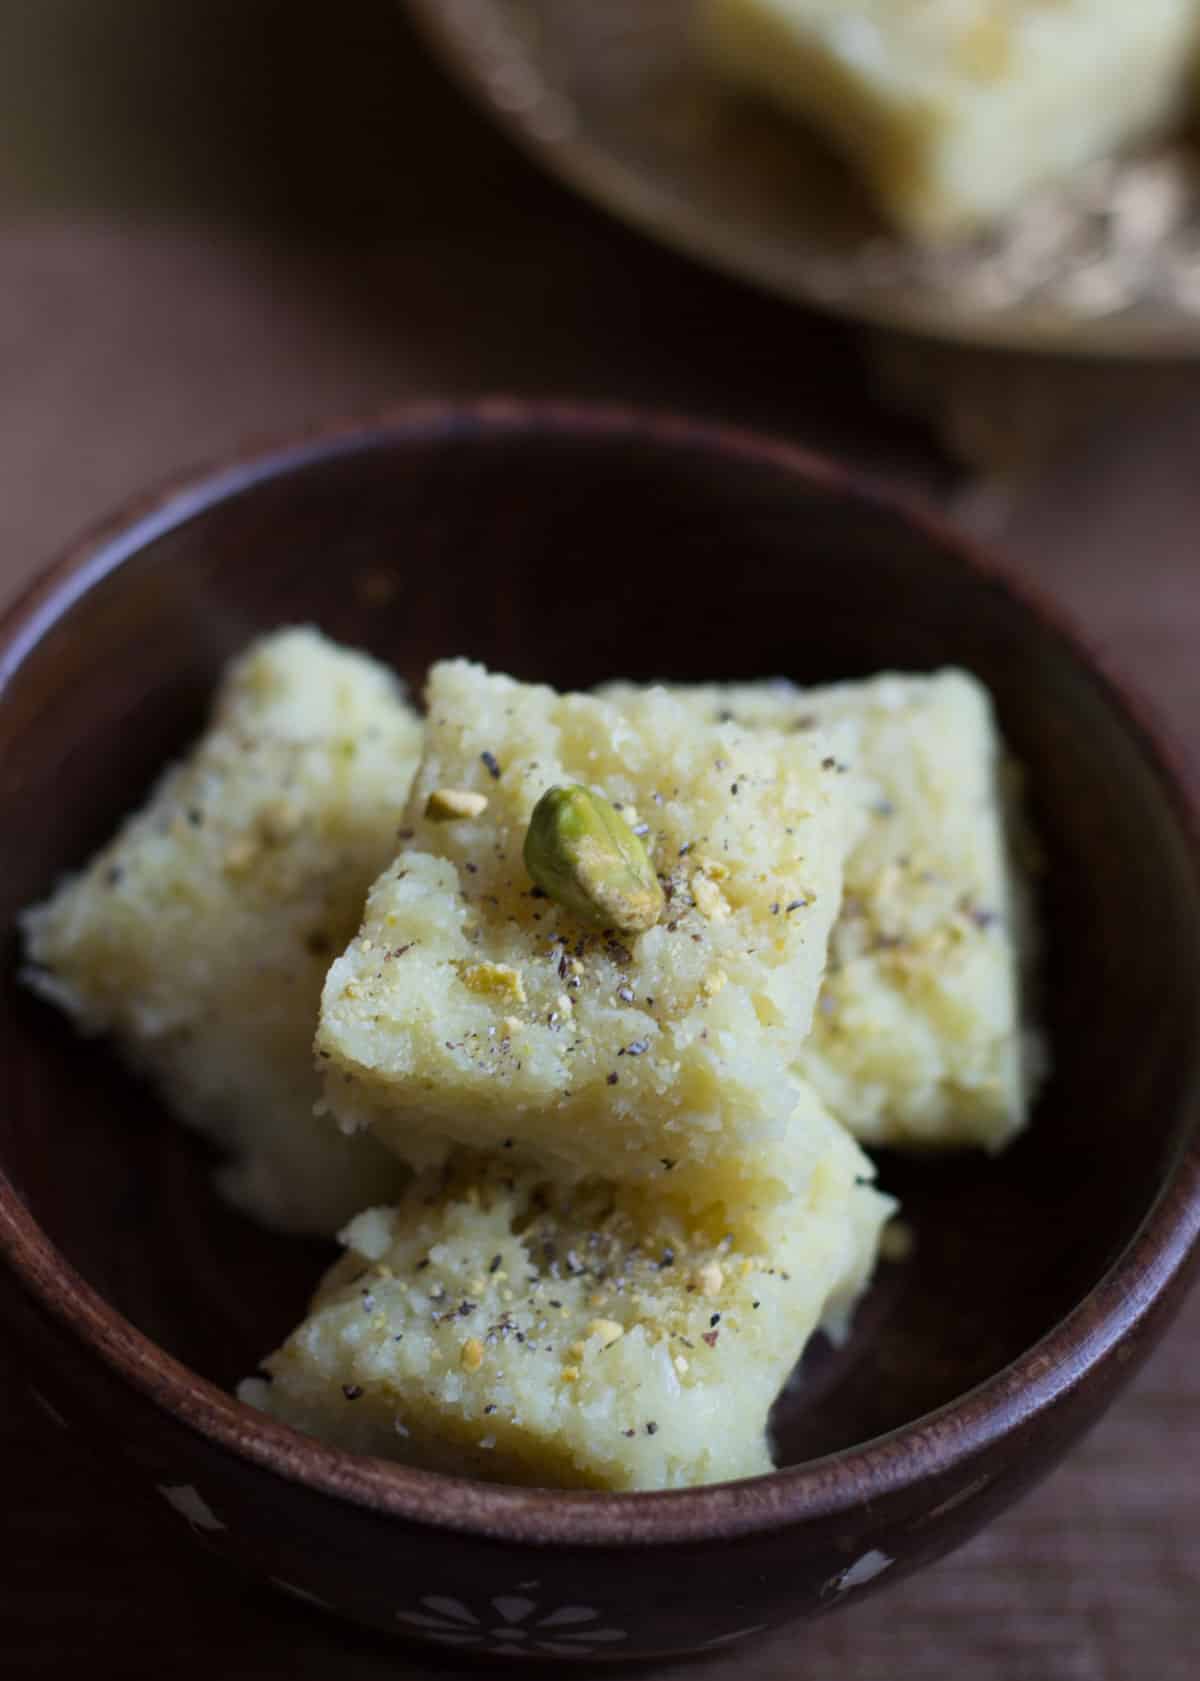 Spend less time in the kitchen and more time with your family this Diwali. Here's a 15-minute recipe to make this soft and delicious Coconut Barfi that your kids will love.